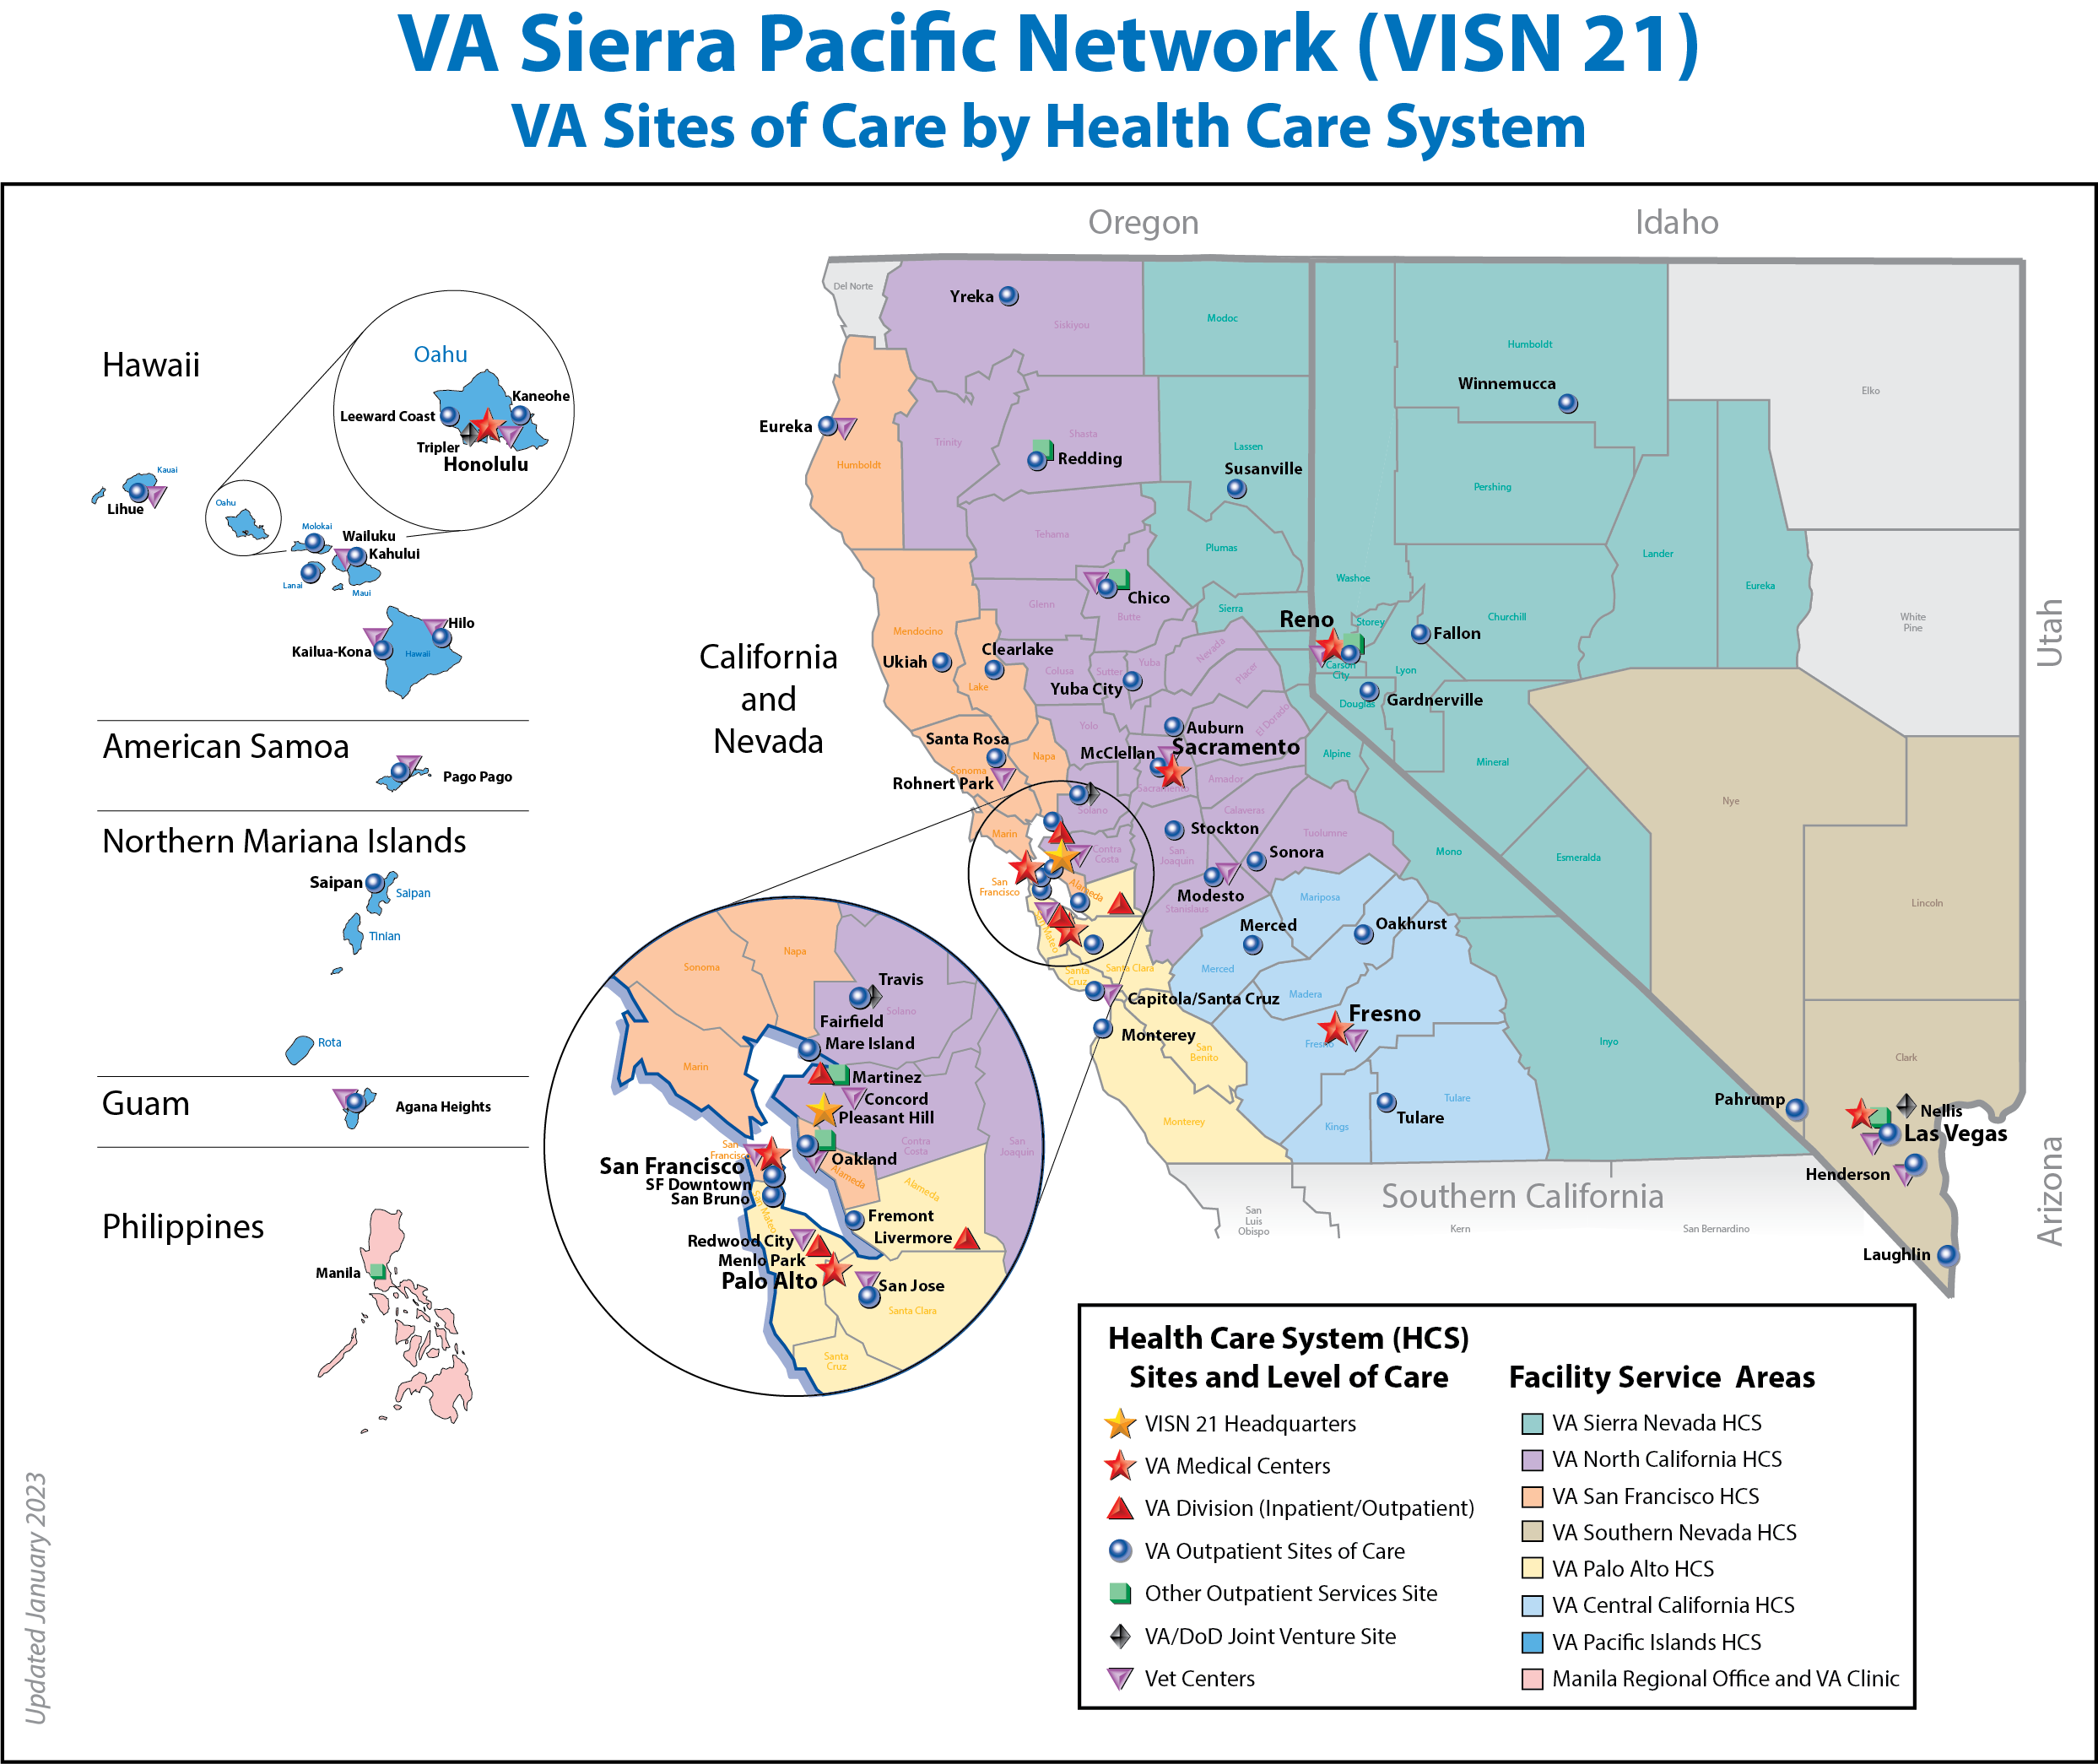 VA Sierra Pacifc Network (VISN 21) Sites of Care by Health Care System